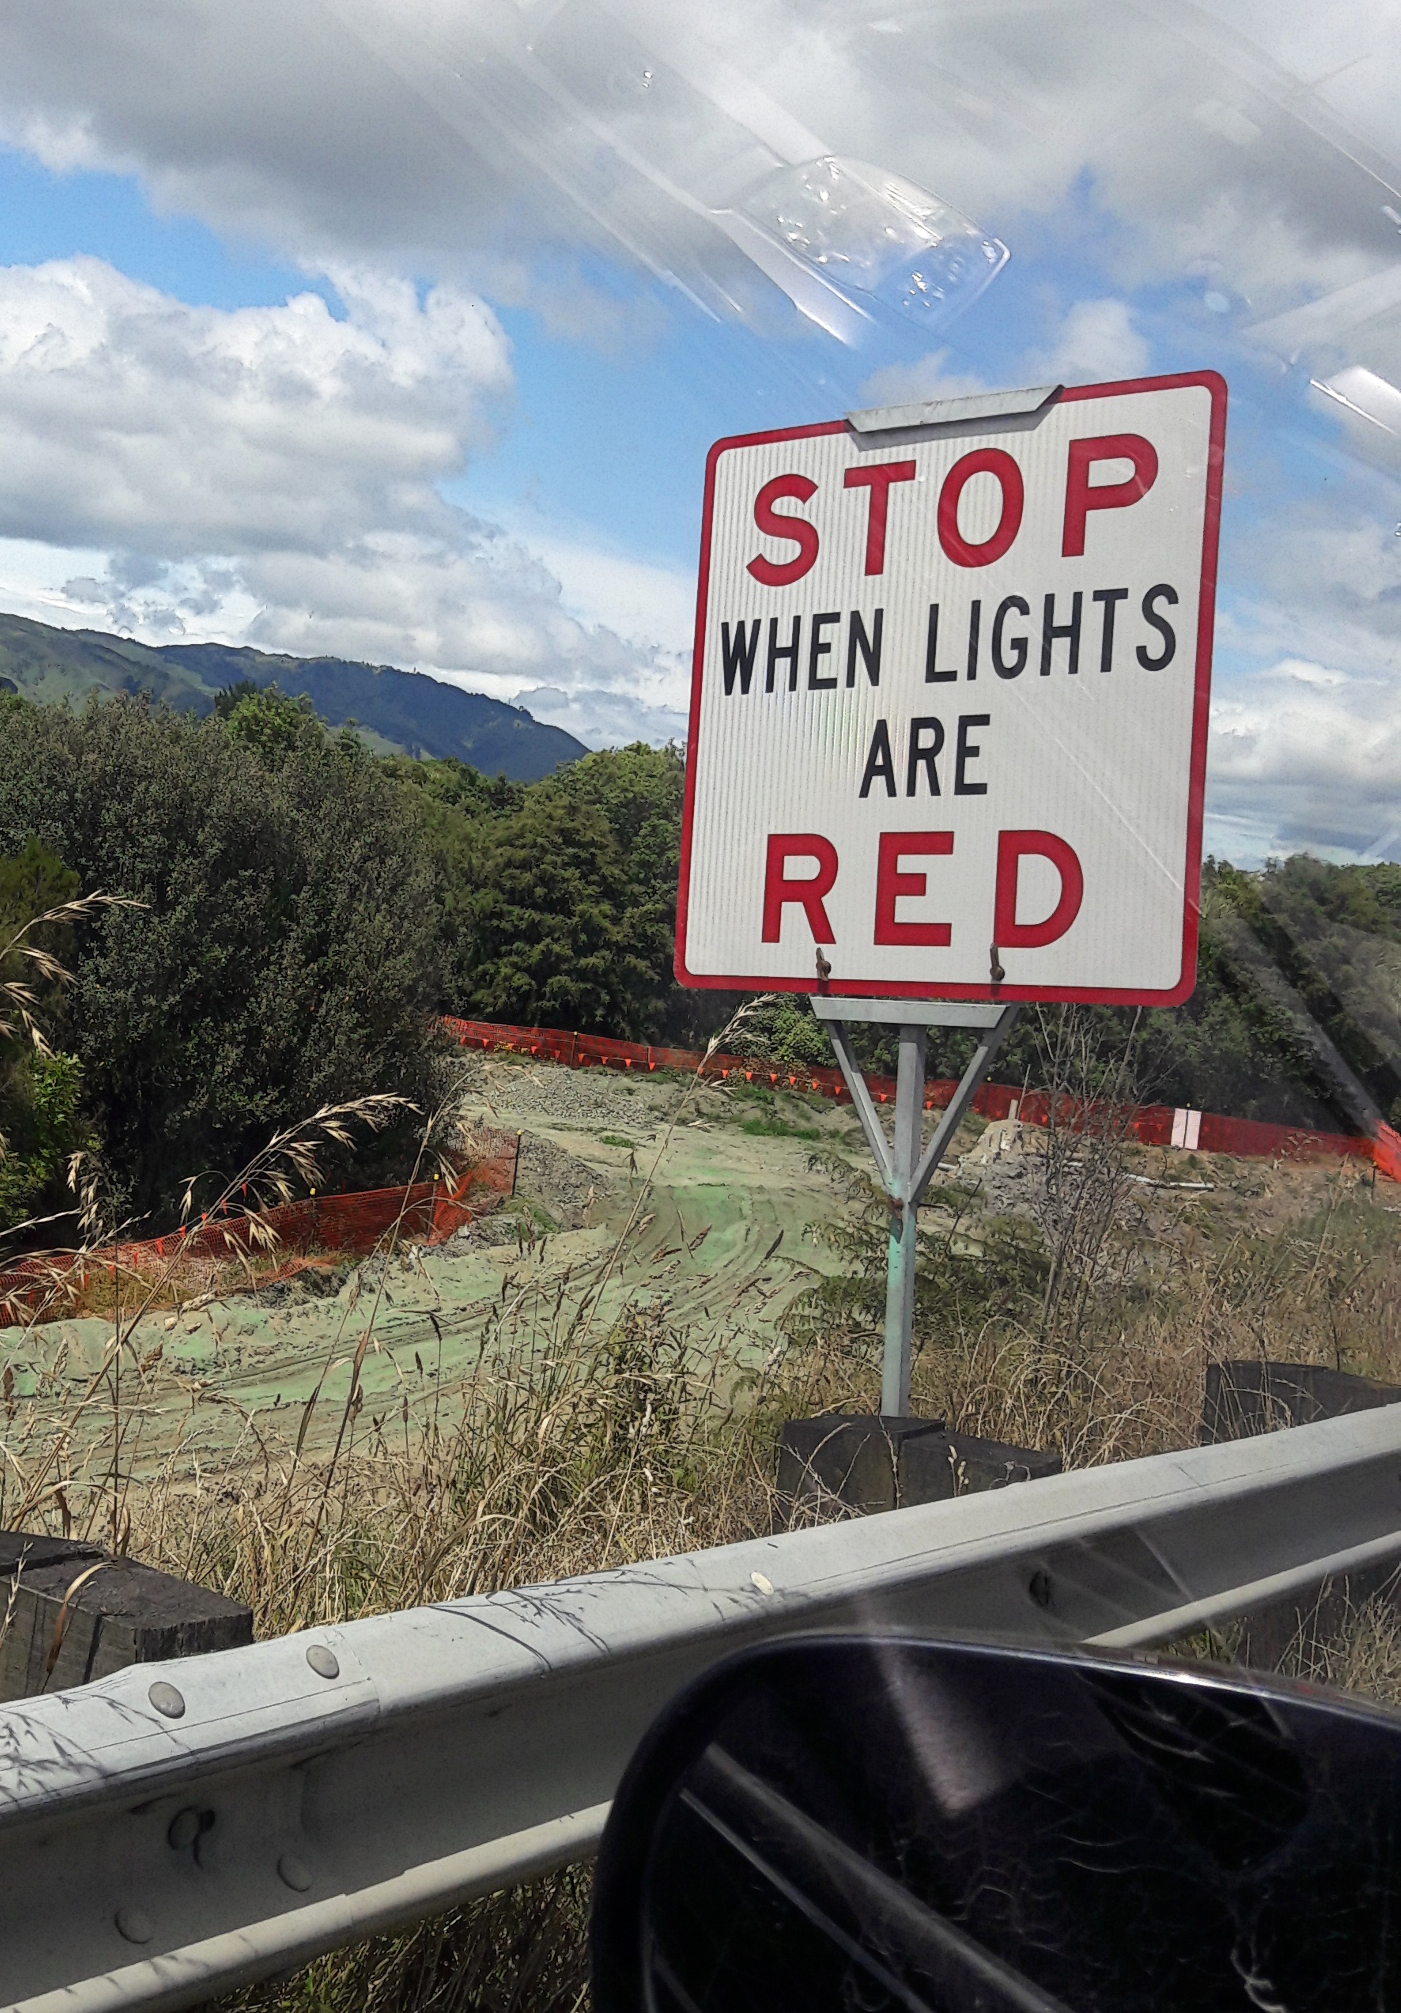 Spotted on the side of New Zealand's State Highway #1. "Doesn't it go without saying?"